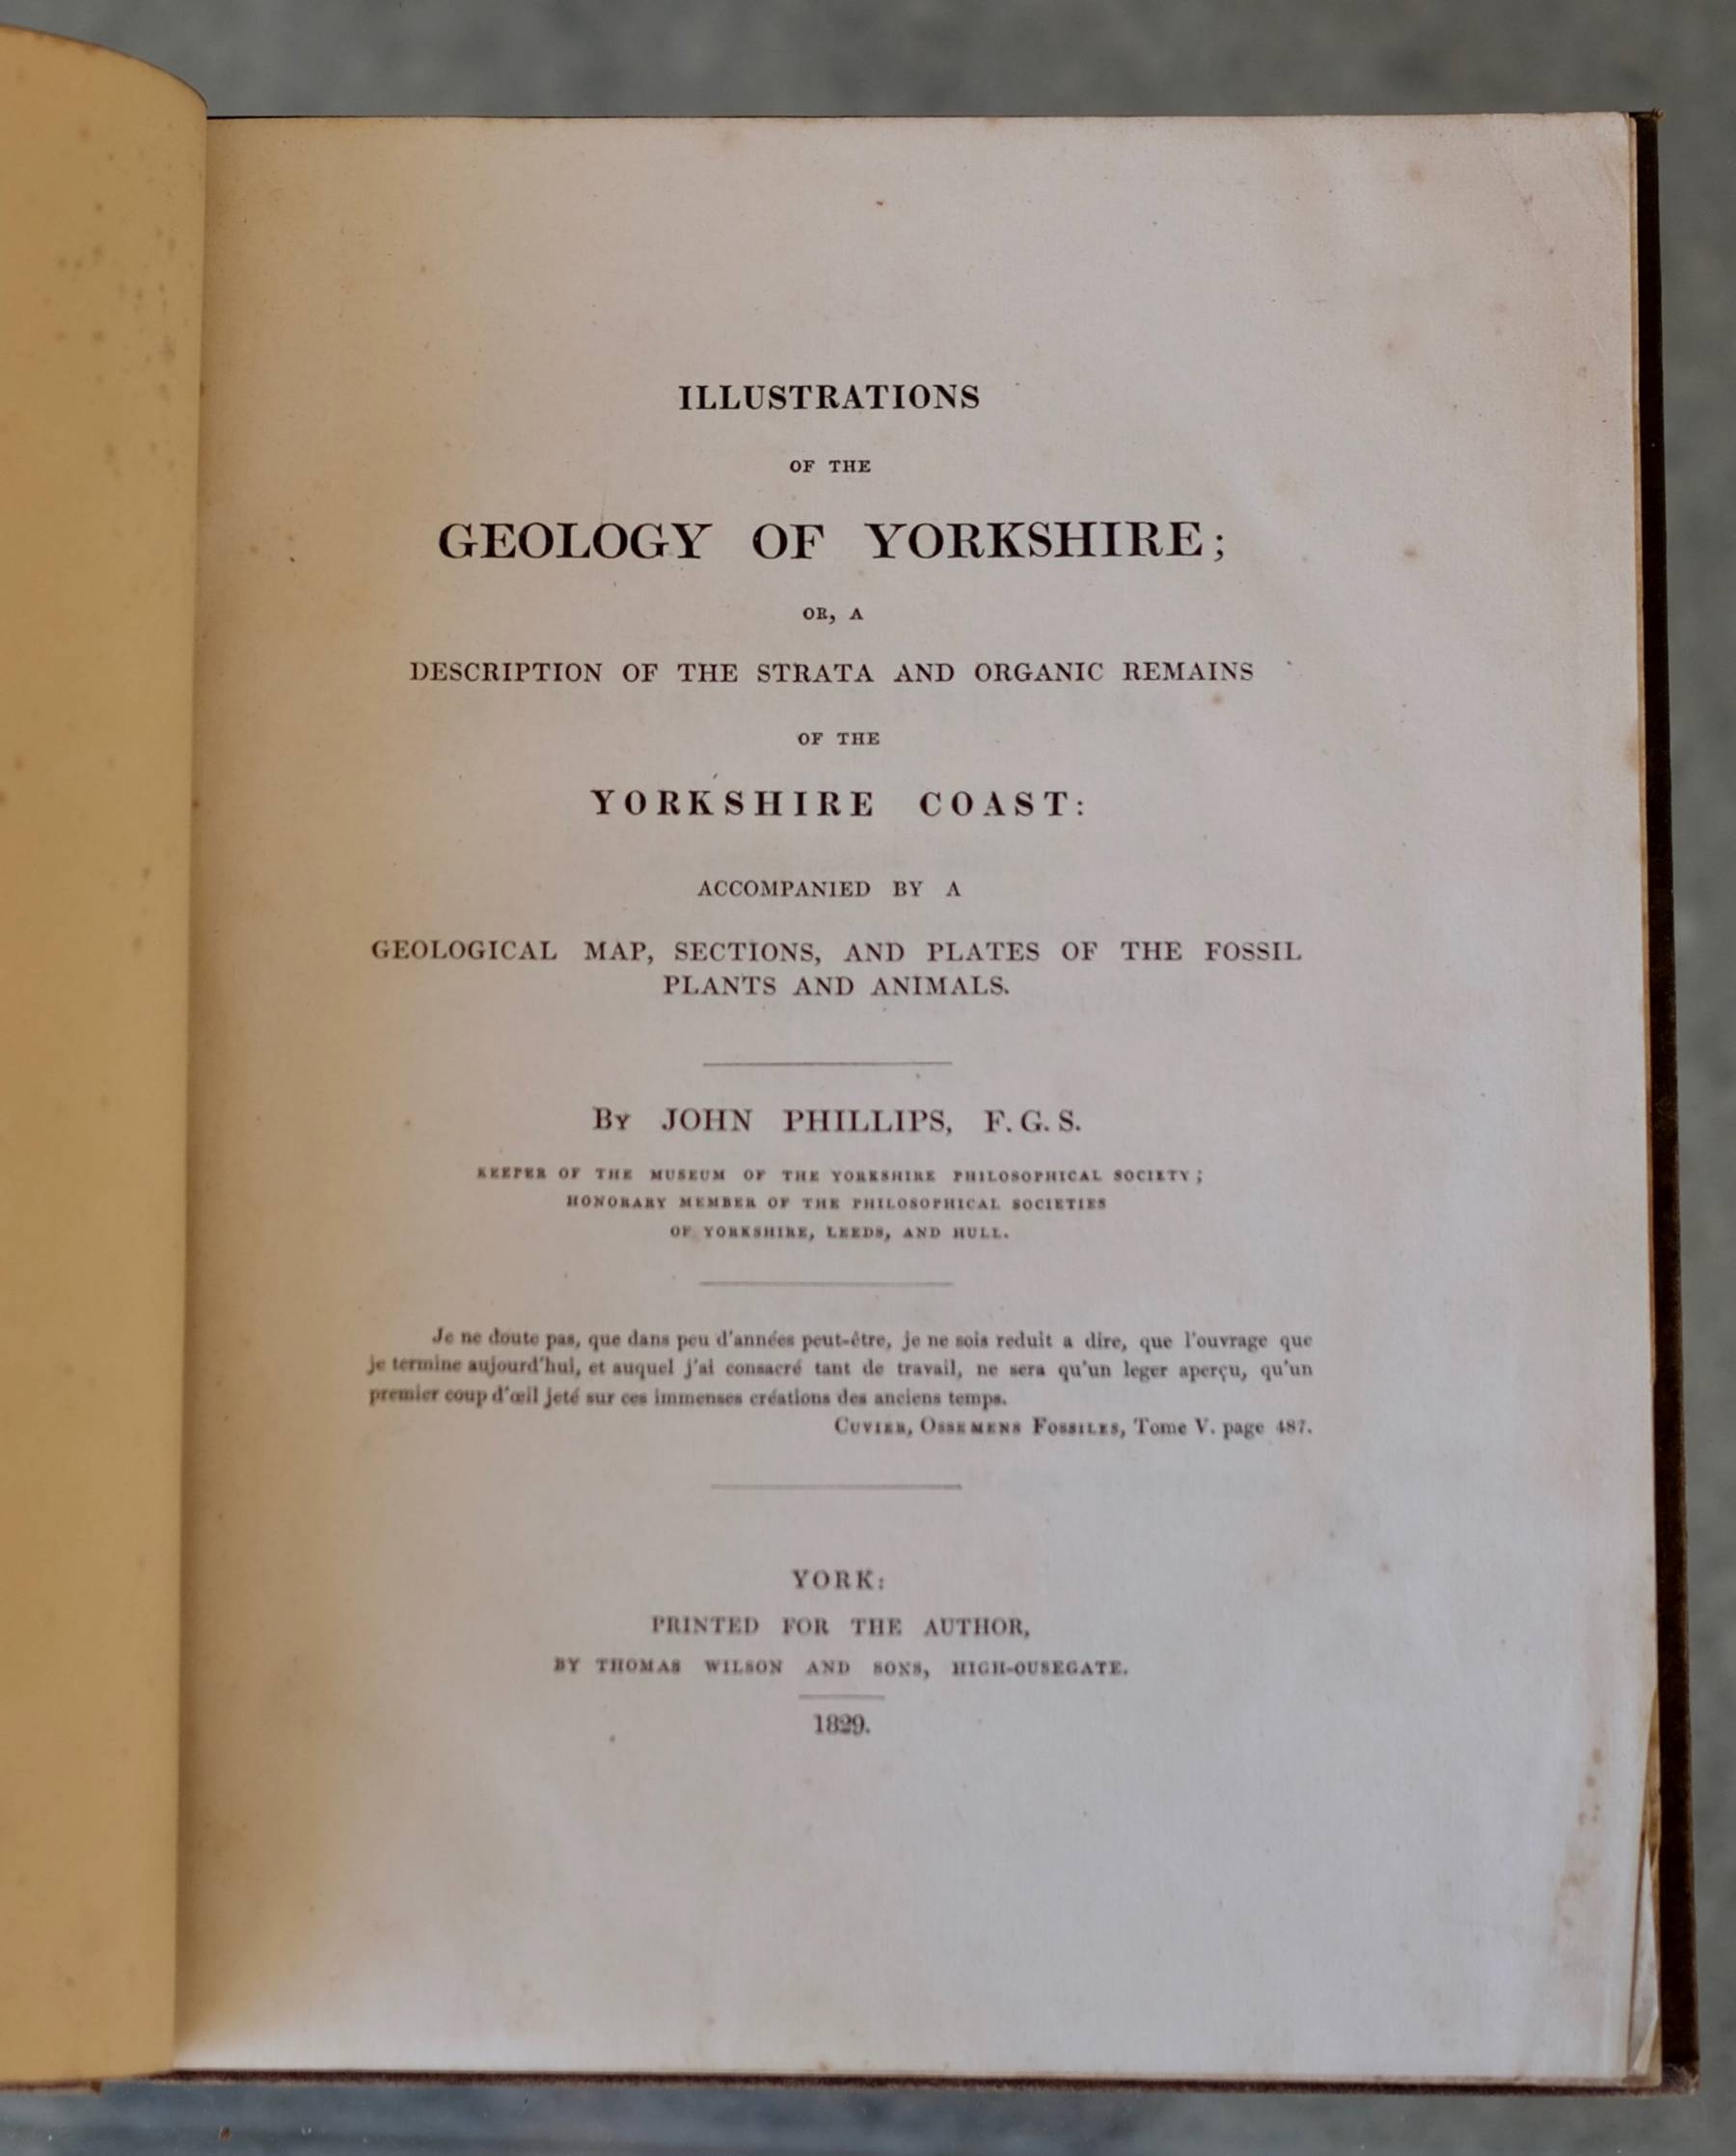 Geology of Yorkshire by John Phillips